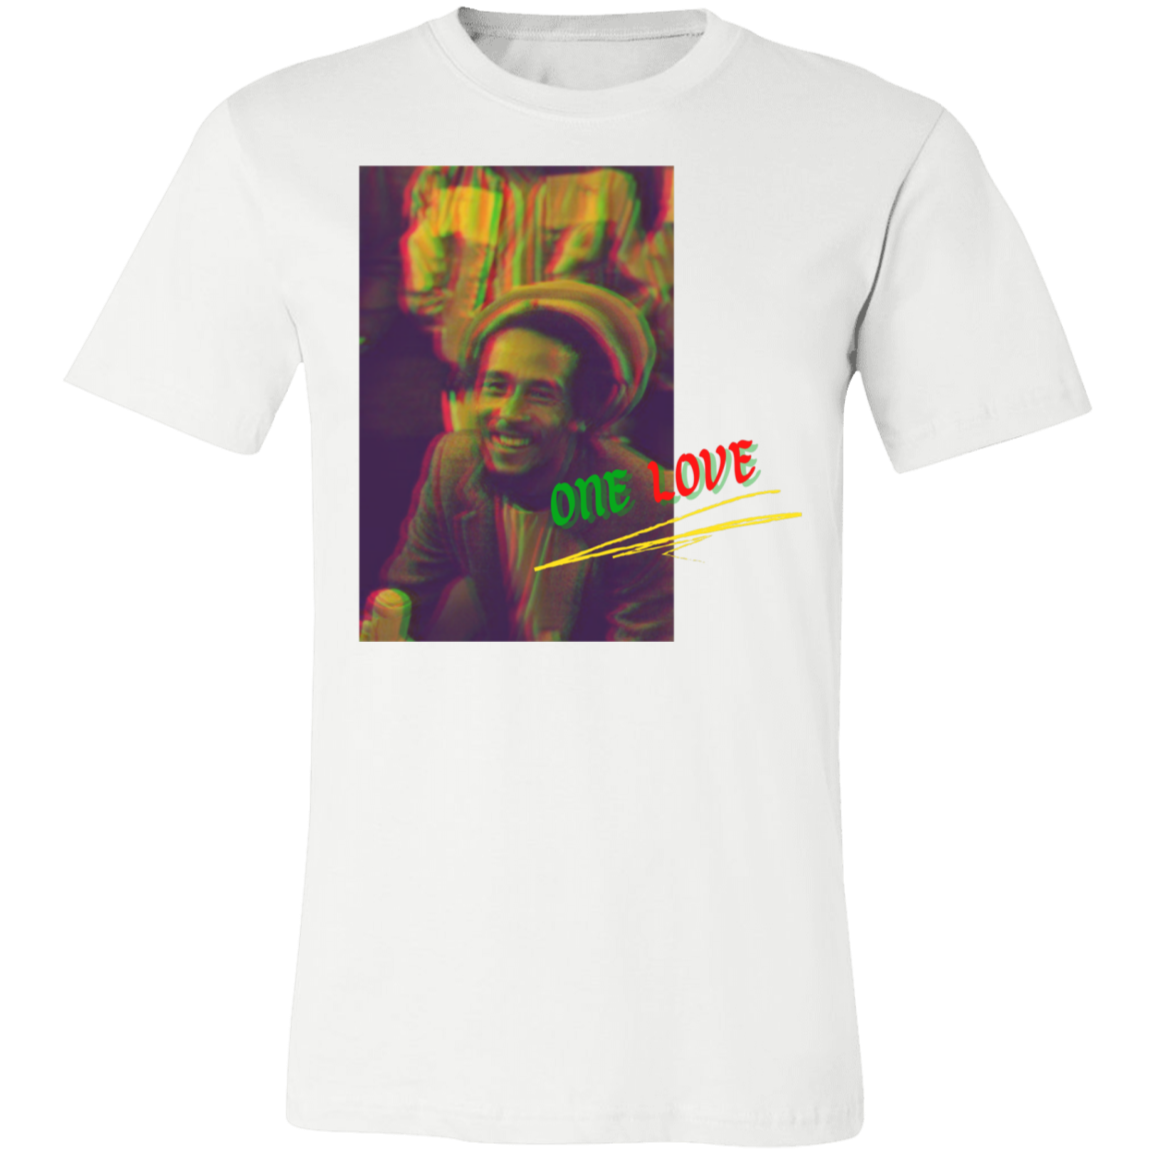 bob marley graphic tee in white, it reads "one love"